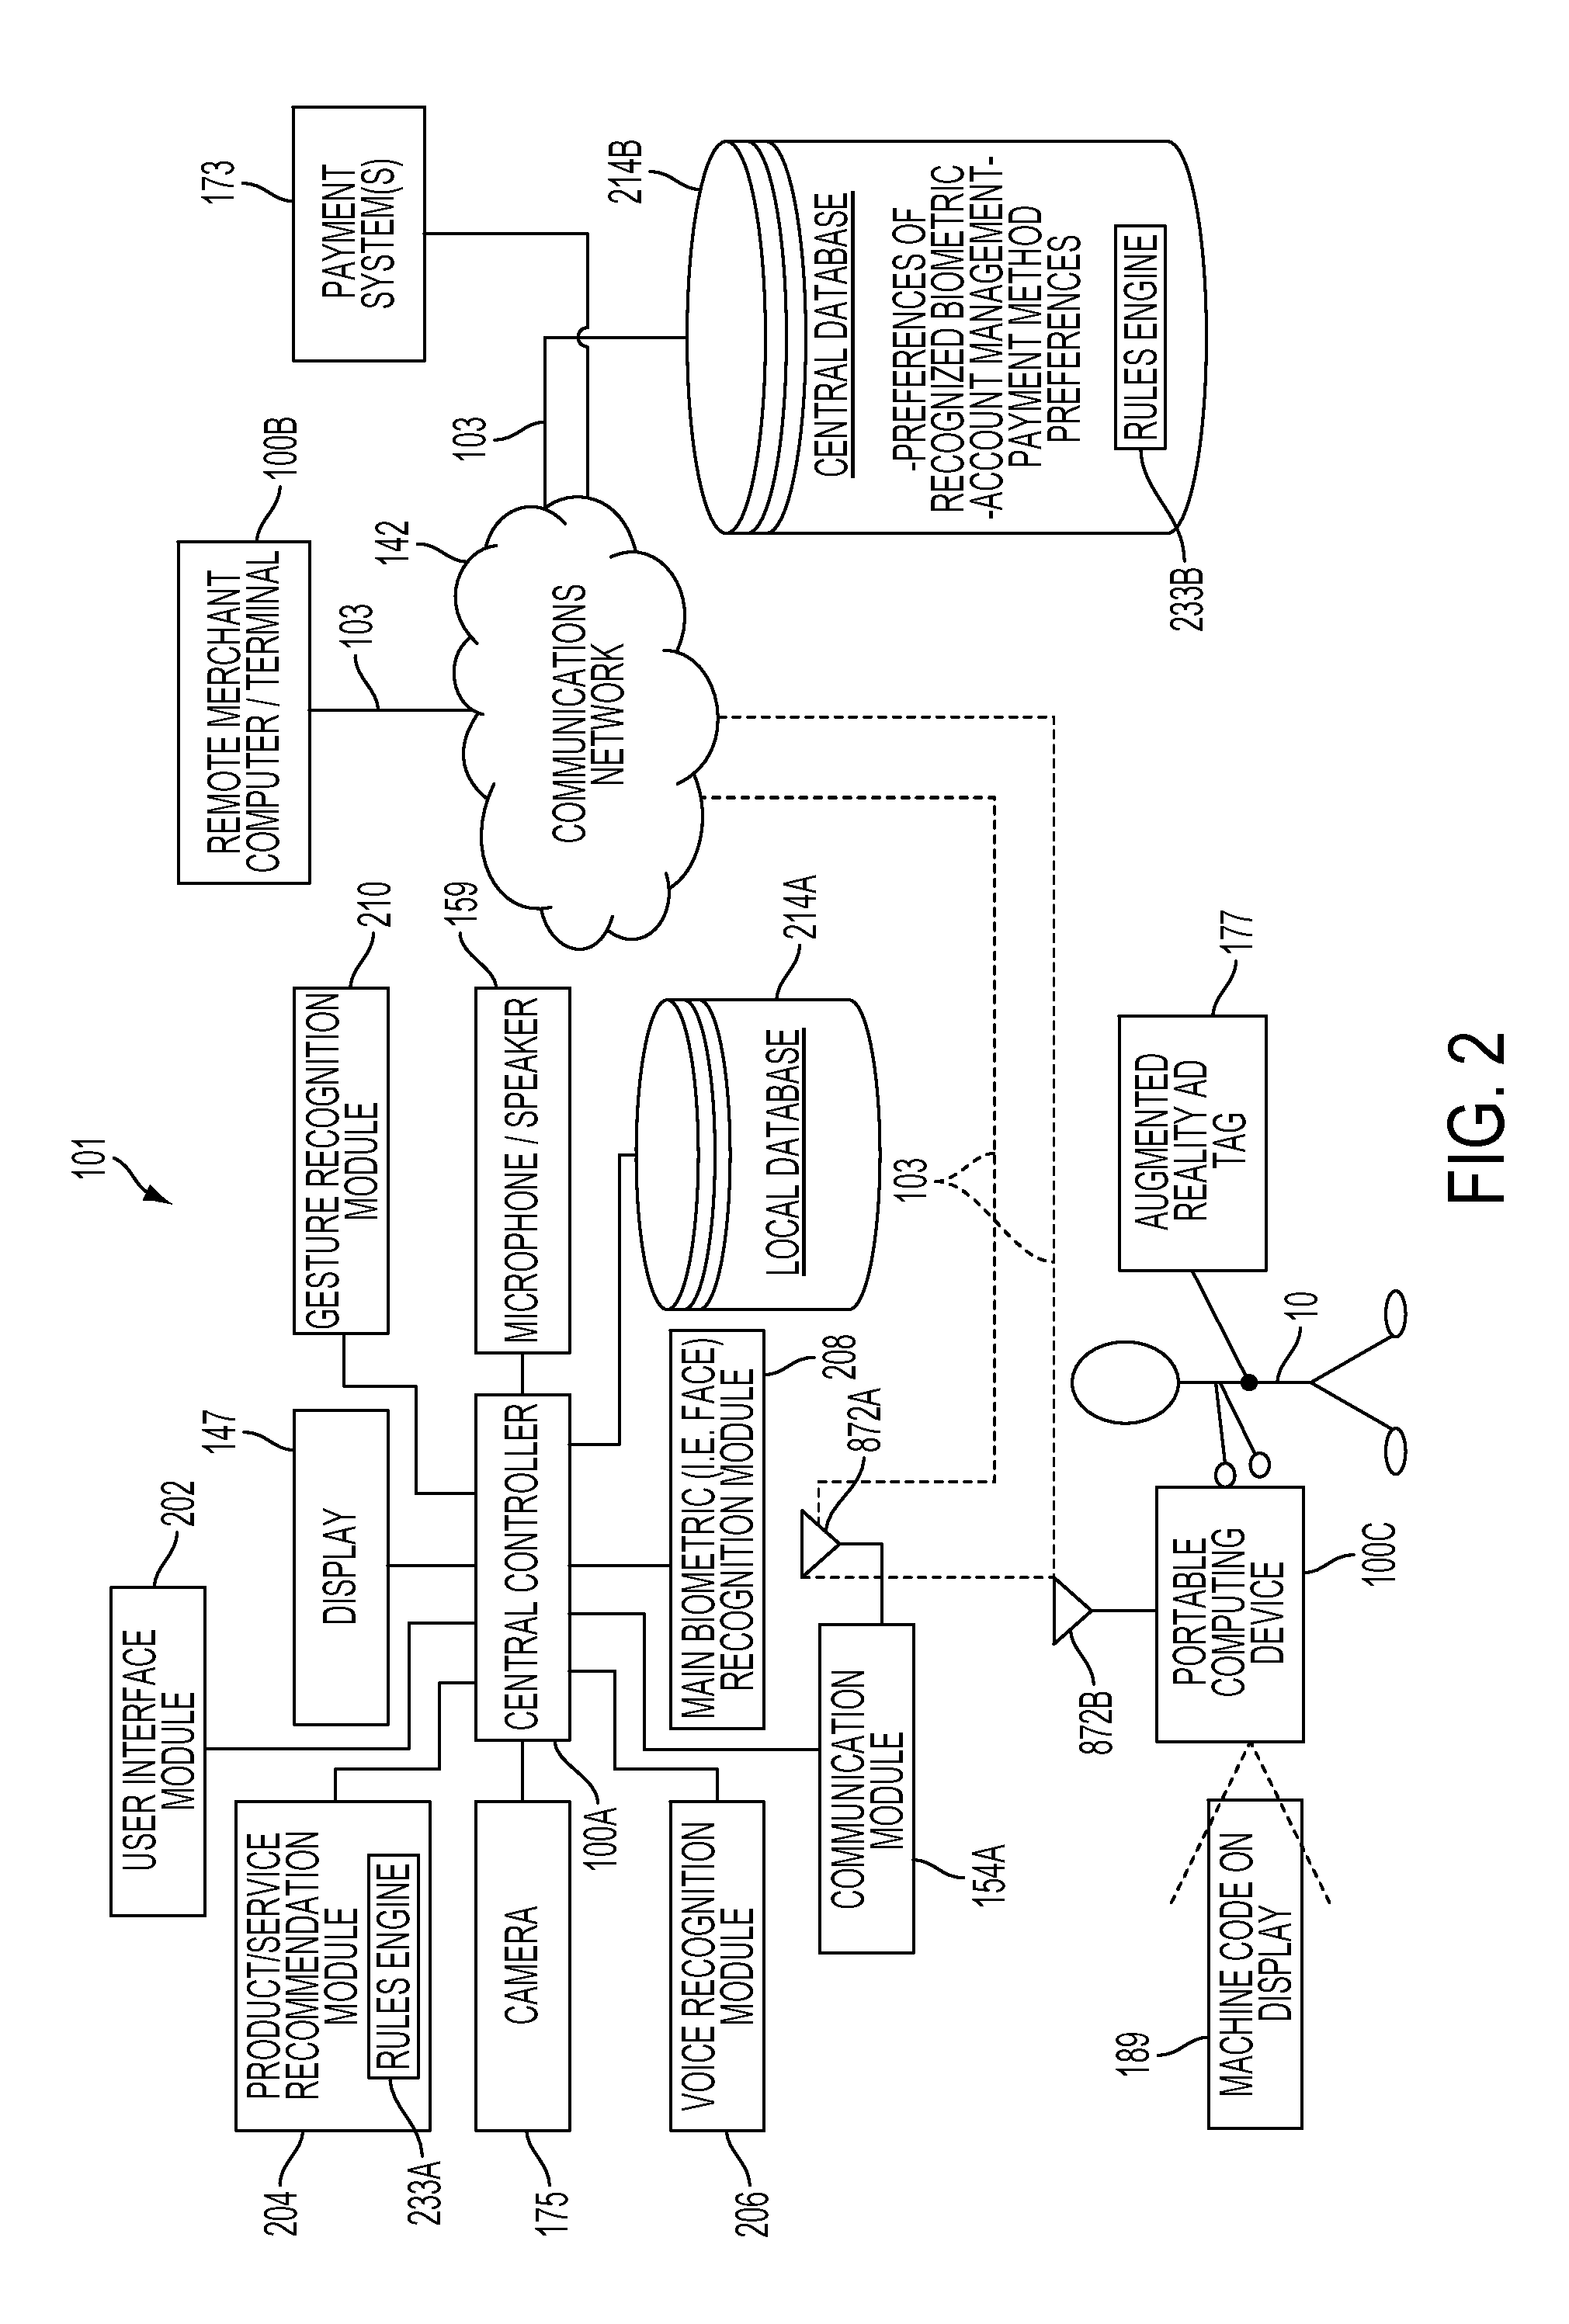 System and method for interactive promotion of products and services